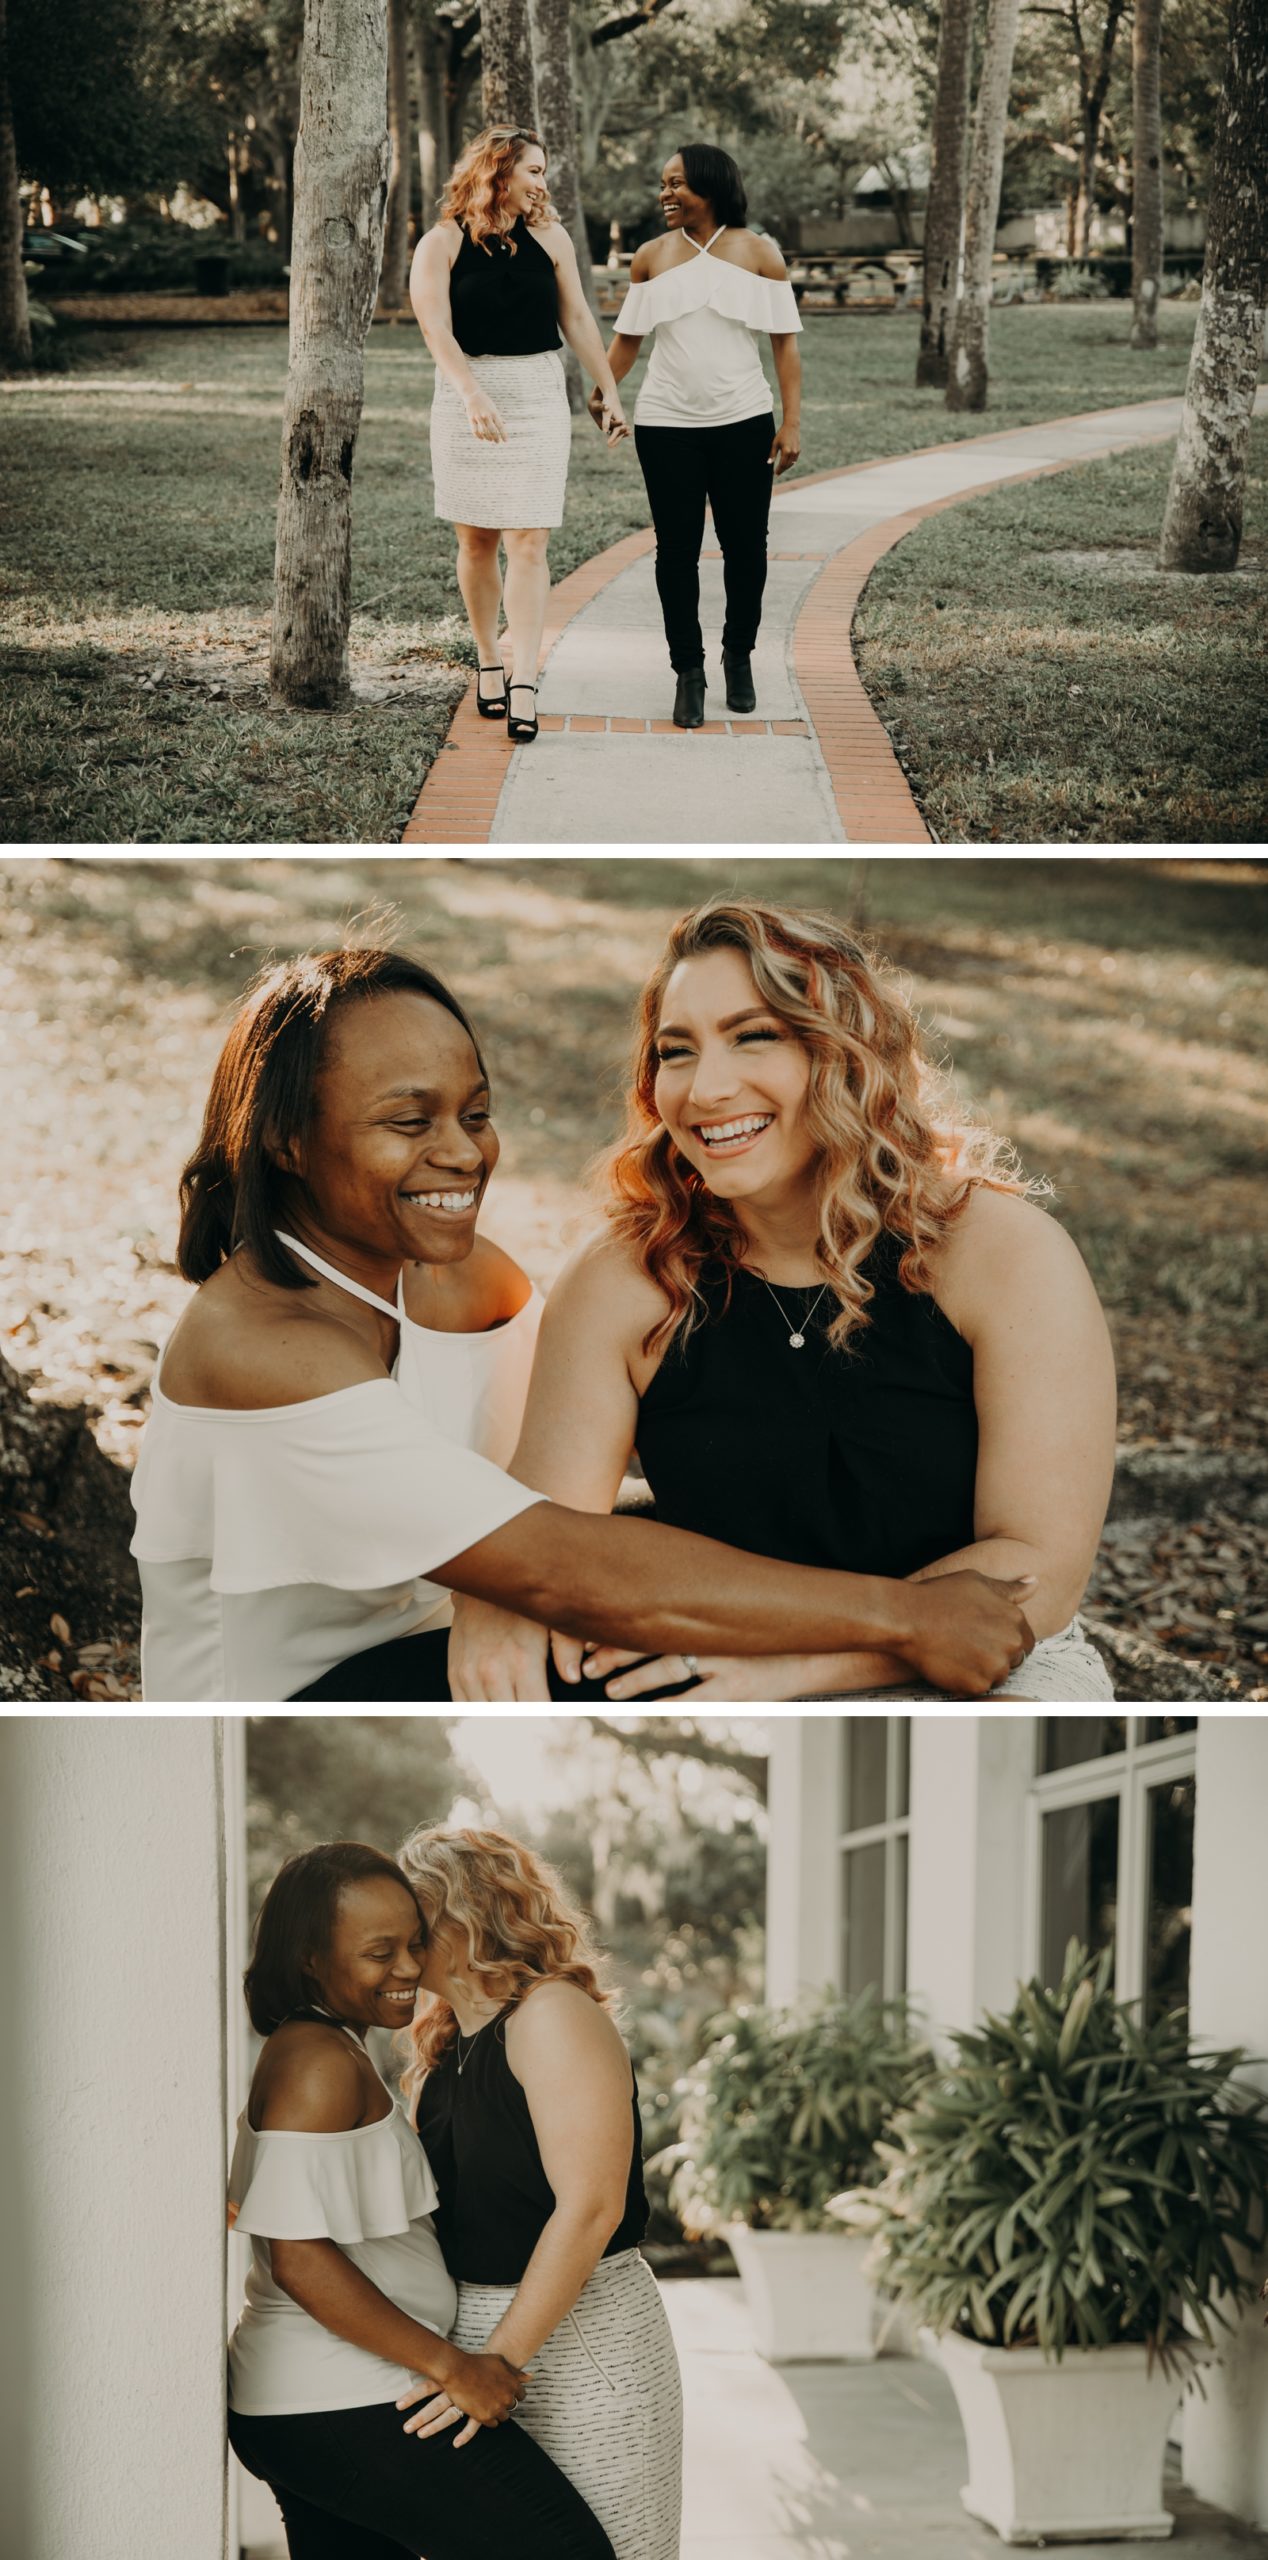 Katie and Angie's Tampa Florida Engagement, Love is Love, Juju Photography San Francisco Wedding Photographer